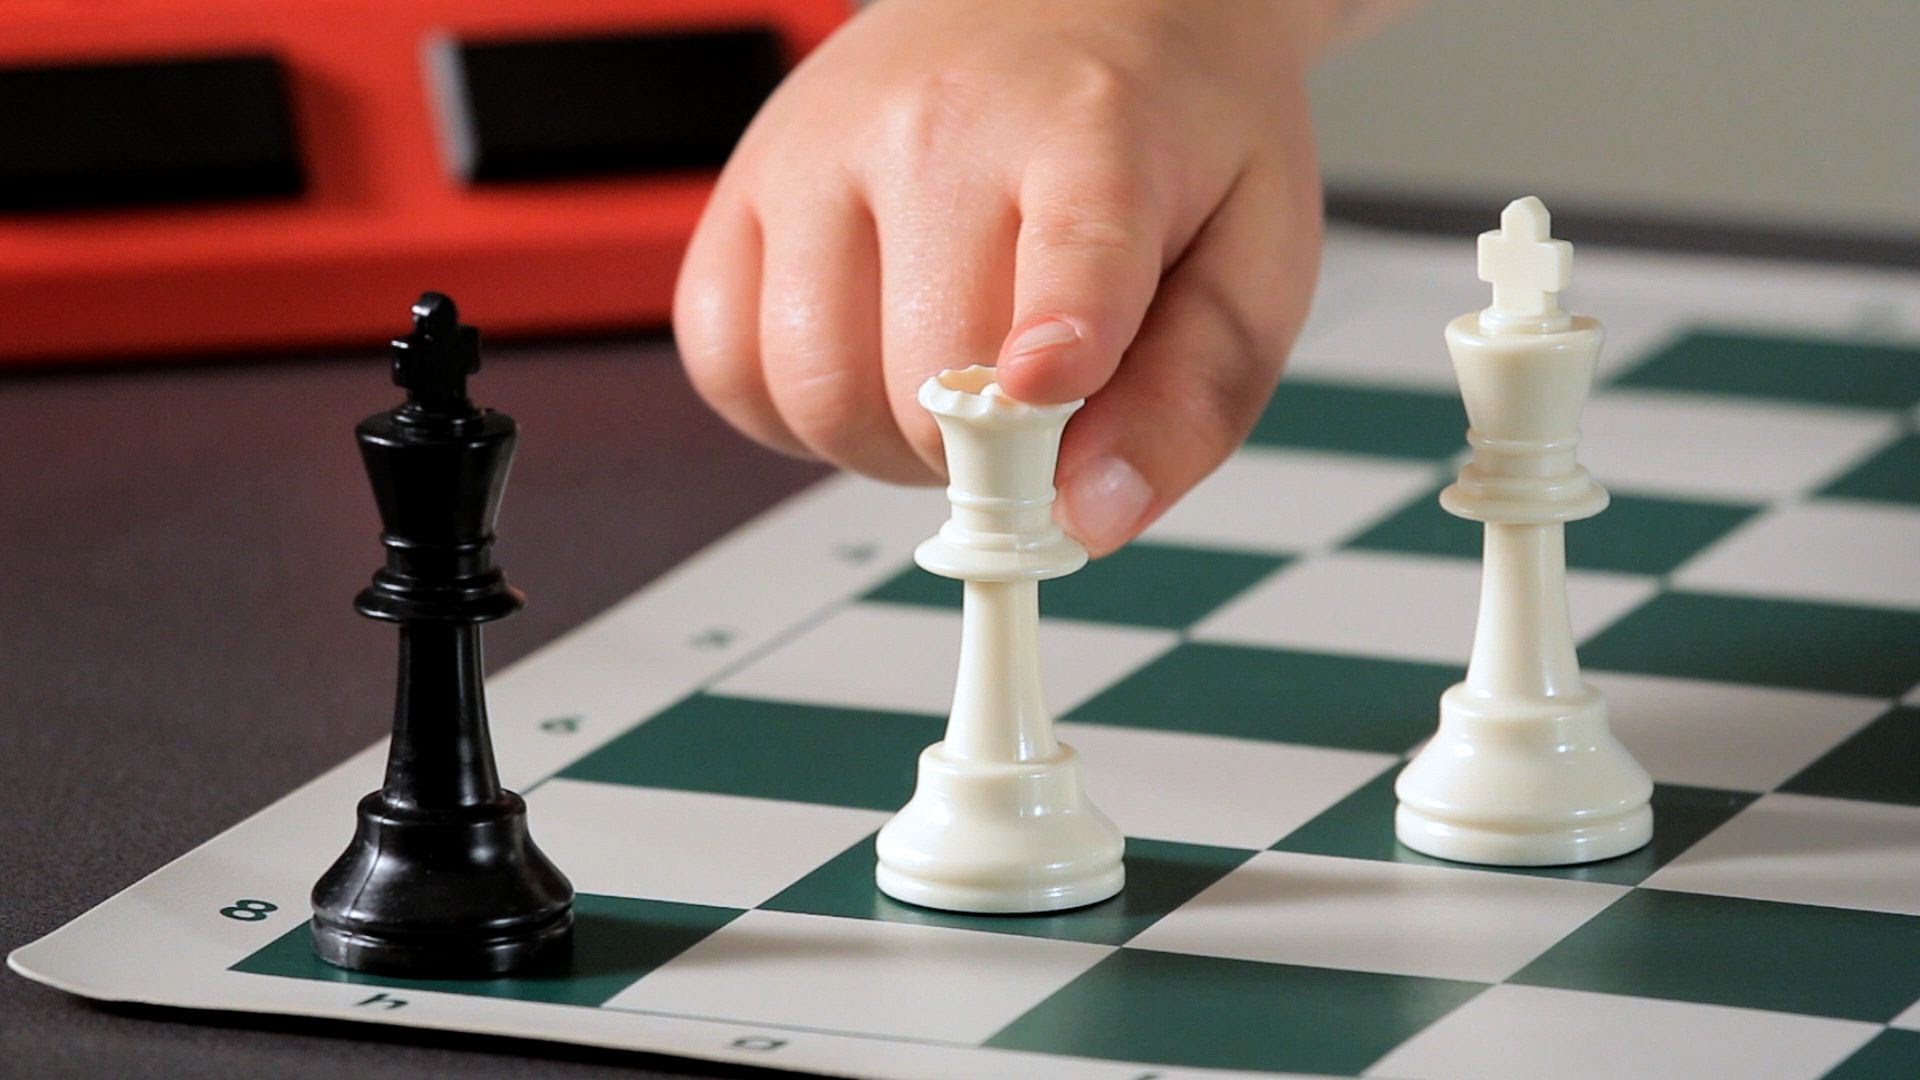 NDpatzer's Blog • How many kinds of chess ability are there